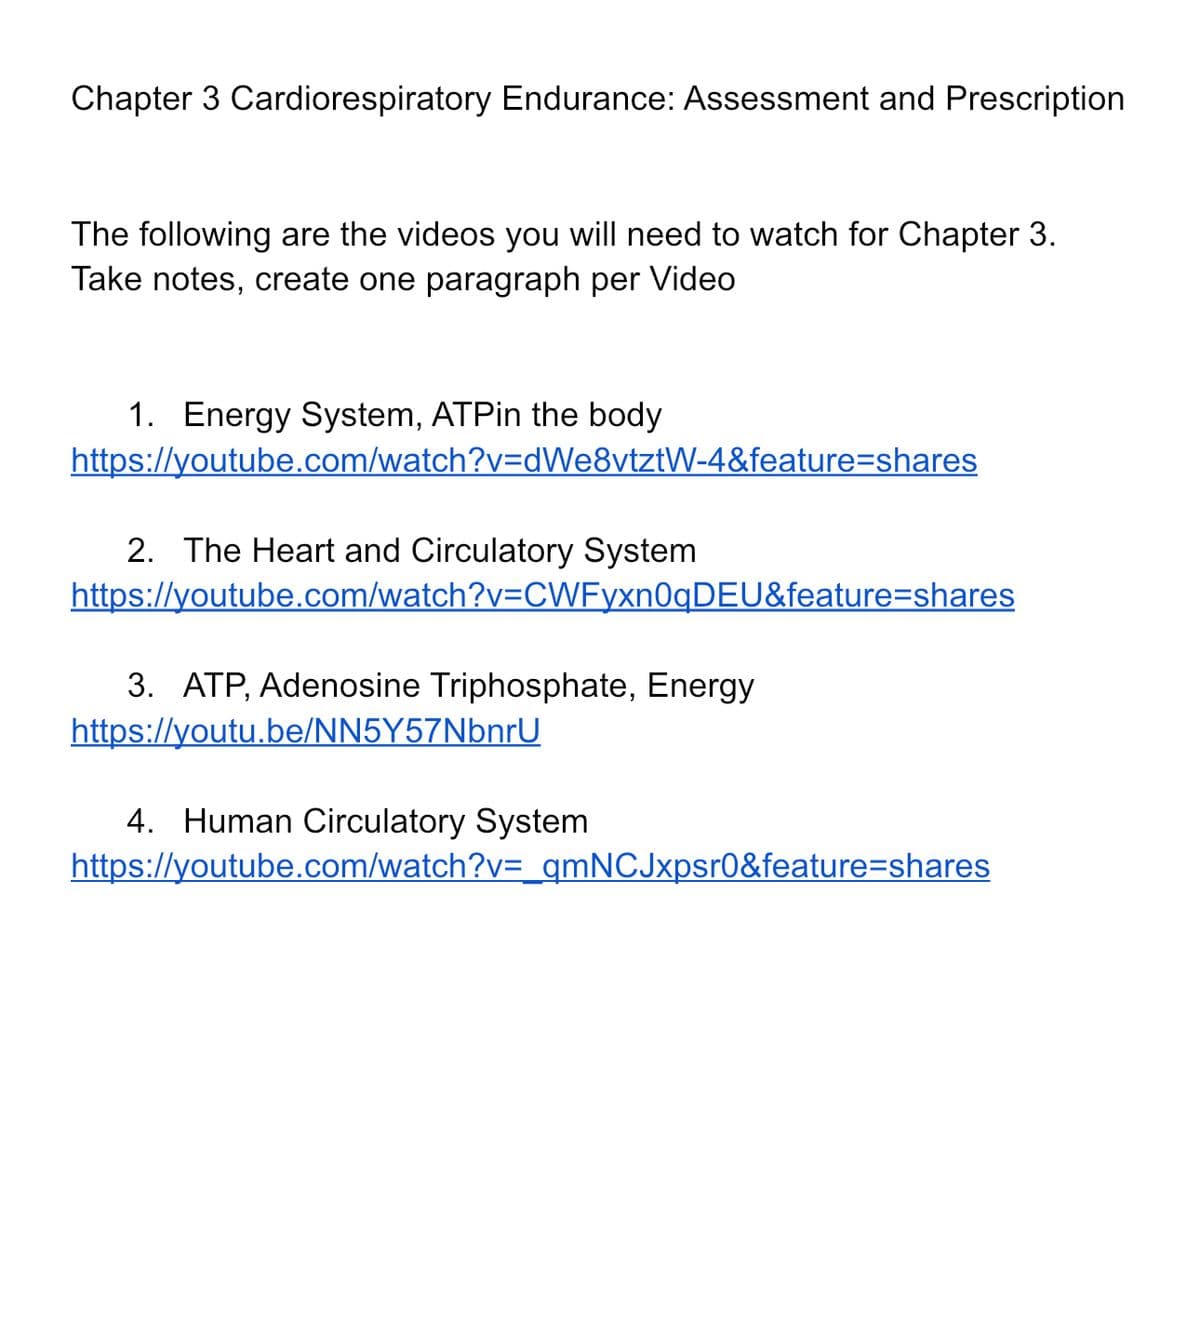 Chapter 3 Cardiorespiratory Endurance: Assessment and Prescription
The following are the videos you will need to watch for Chapter 3.
Take notes, create one paragraph per Video
1. Energy System, ATPin the body
https://youtube.com/watch?v=dWe8vtztW-4&feature=shares
2. The Heart and Circulatory System
https://youtube.com/watch?v=CWFyxn0qDEU&feature=shares
3. ATP, Adenosine Triphosphate, Energy
https://youtu.be/NN5Y57NbnrU
4. Human Circulatory System
https://youtube.com/watch?v=_qmNCJxpsr0&feature=shares